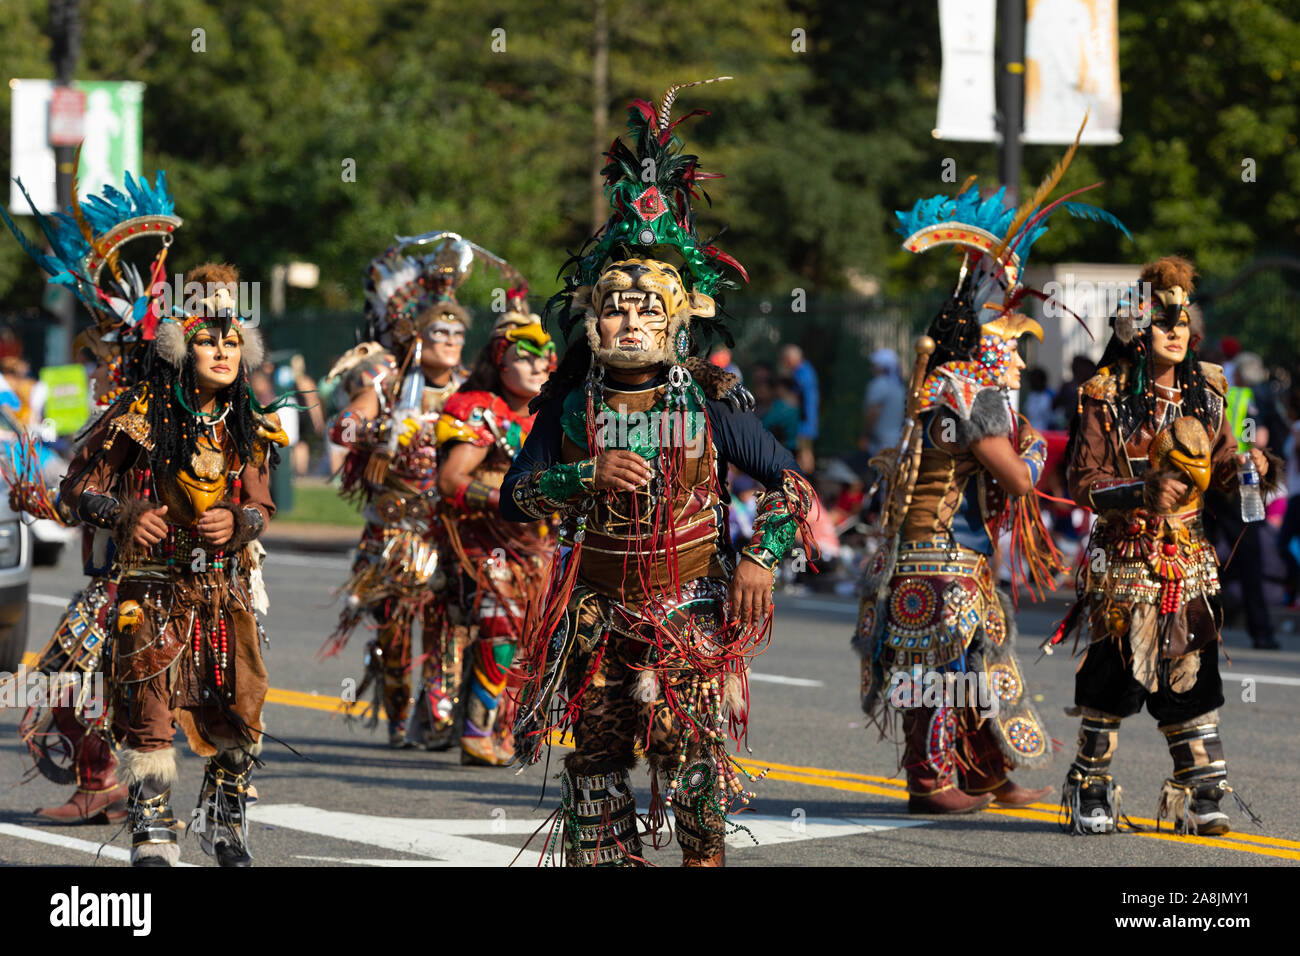 Washington DC, USA - September 21, 2019: The Fiesta DC, The Fiesta DC Parade, guatemalans wearing traditional clothing representing the Indigenous peo Stock Photo